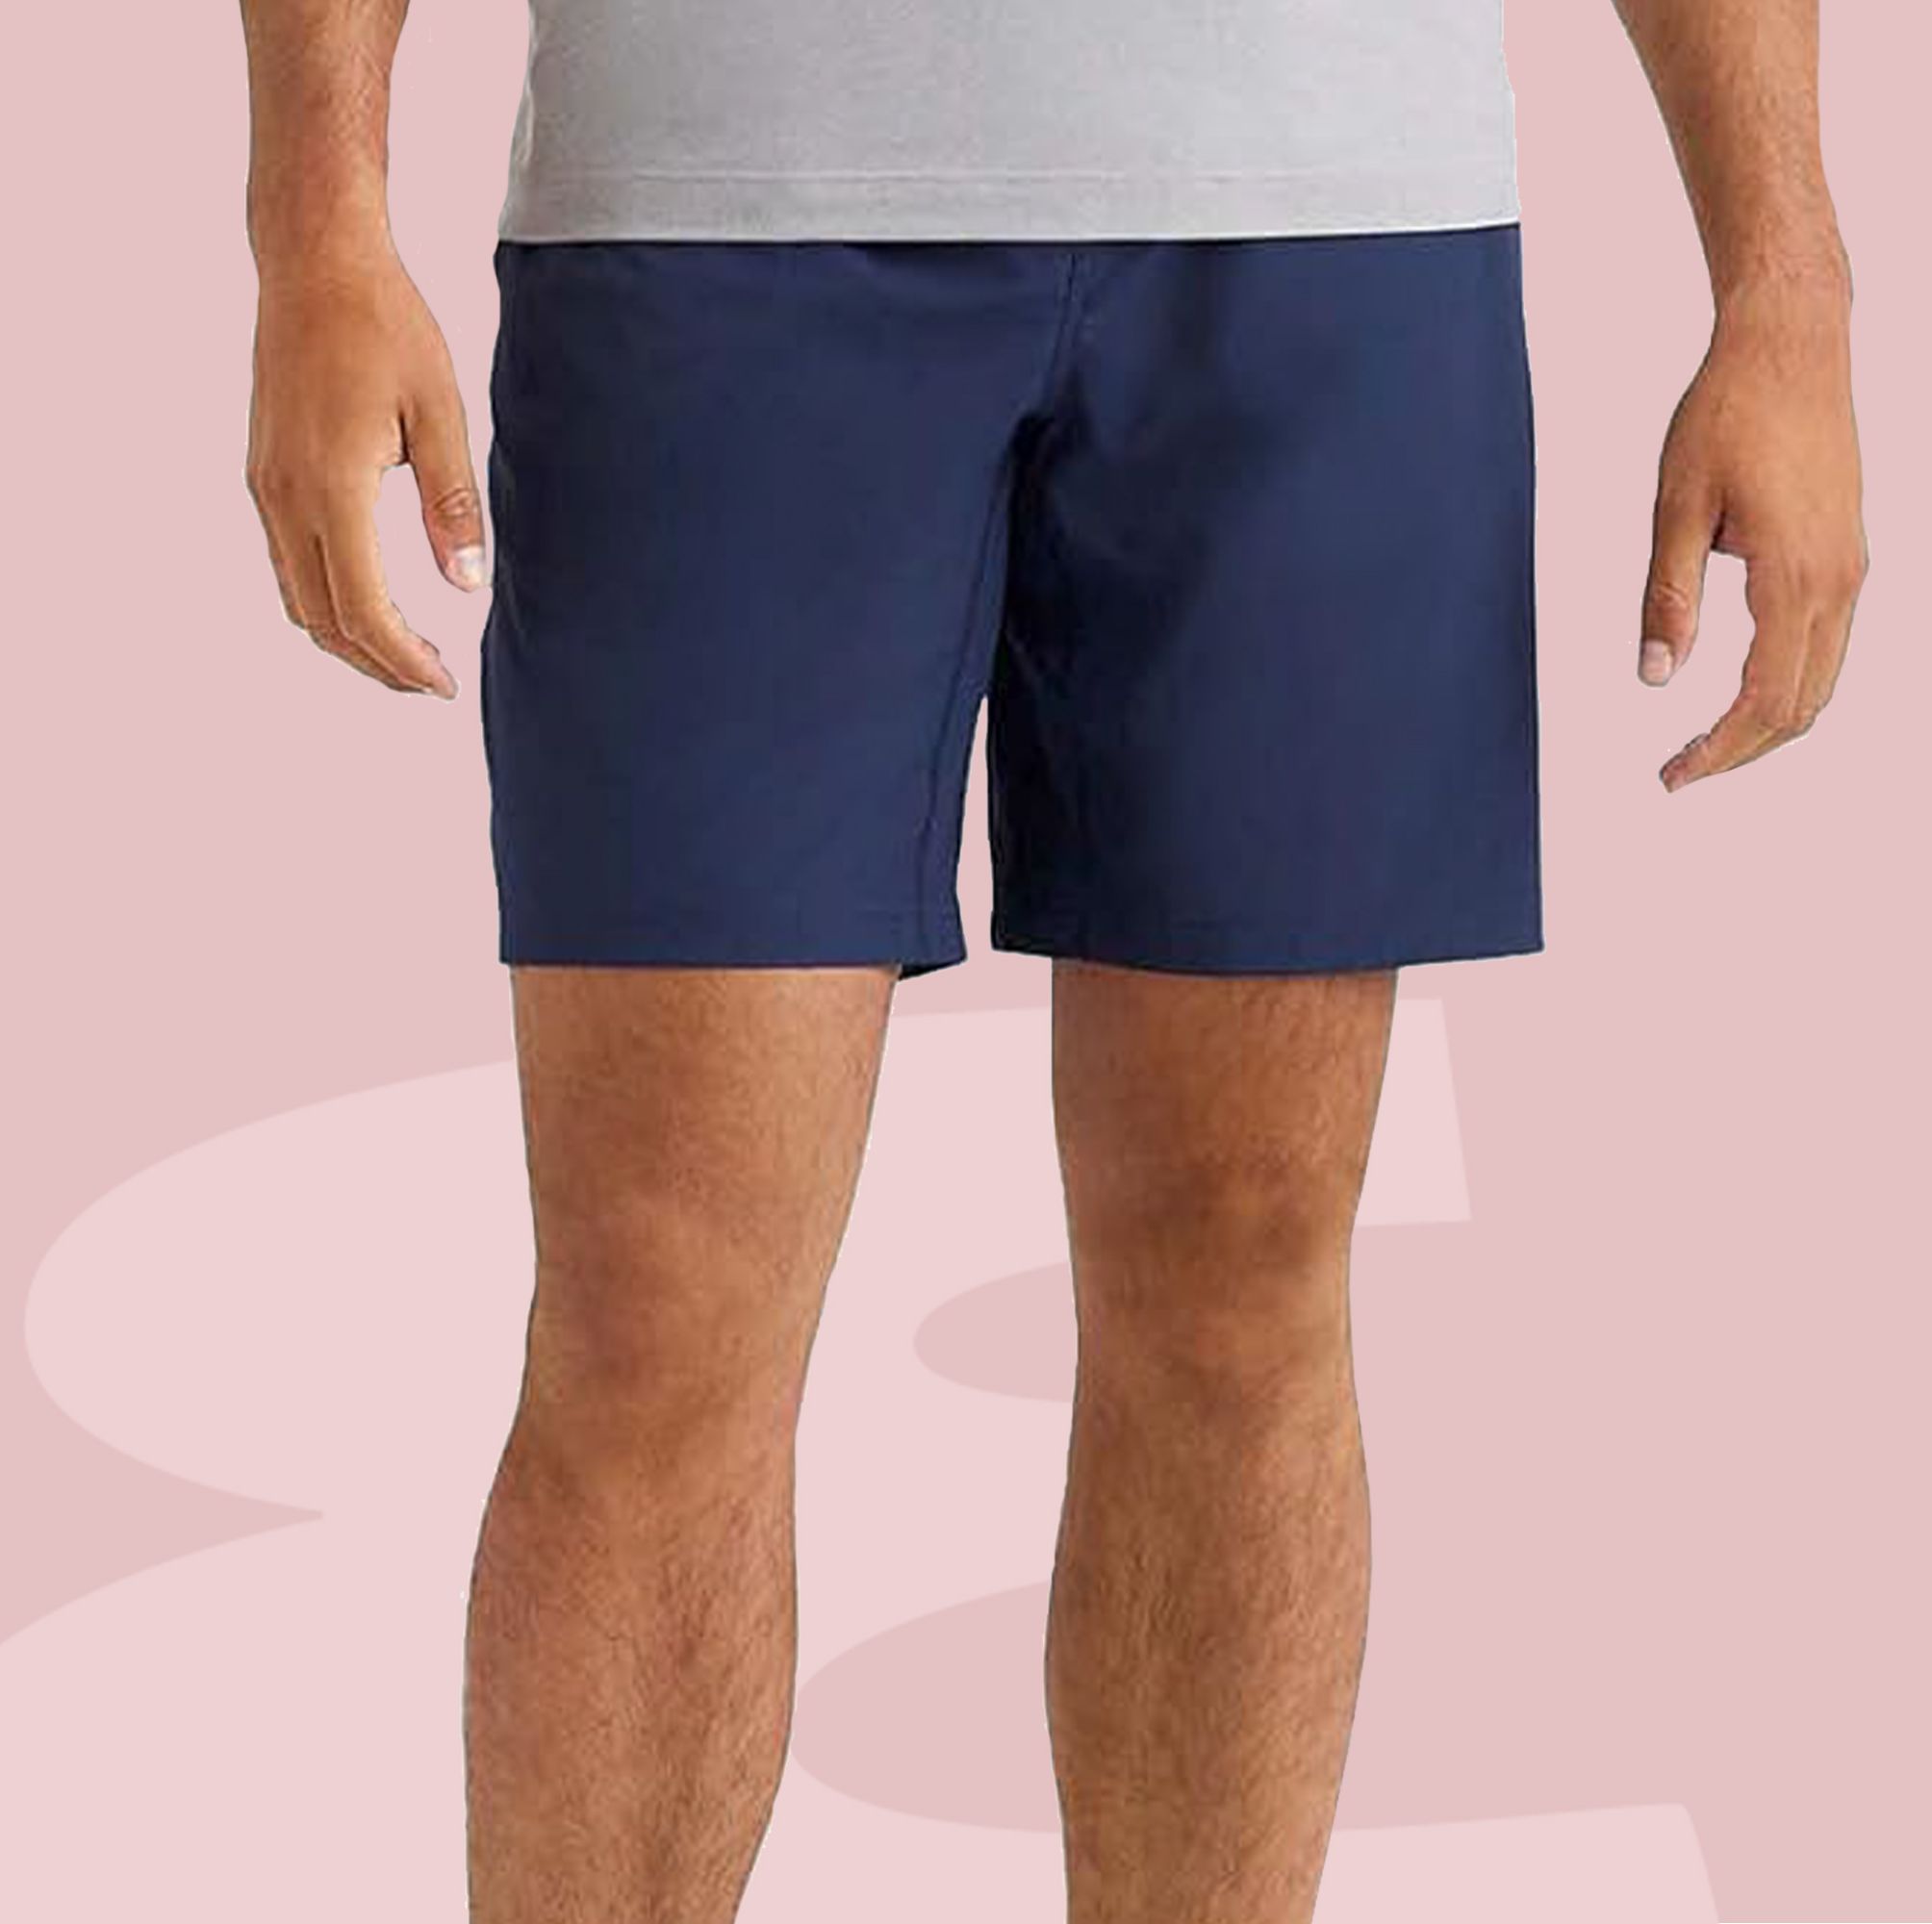 The 15 Best Shorts on Amazon Will Keep You Comfortable All Season Long